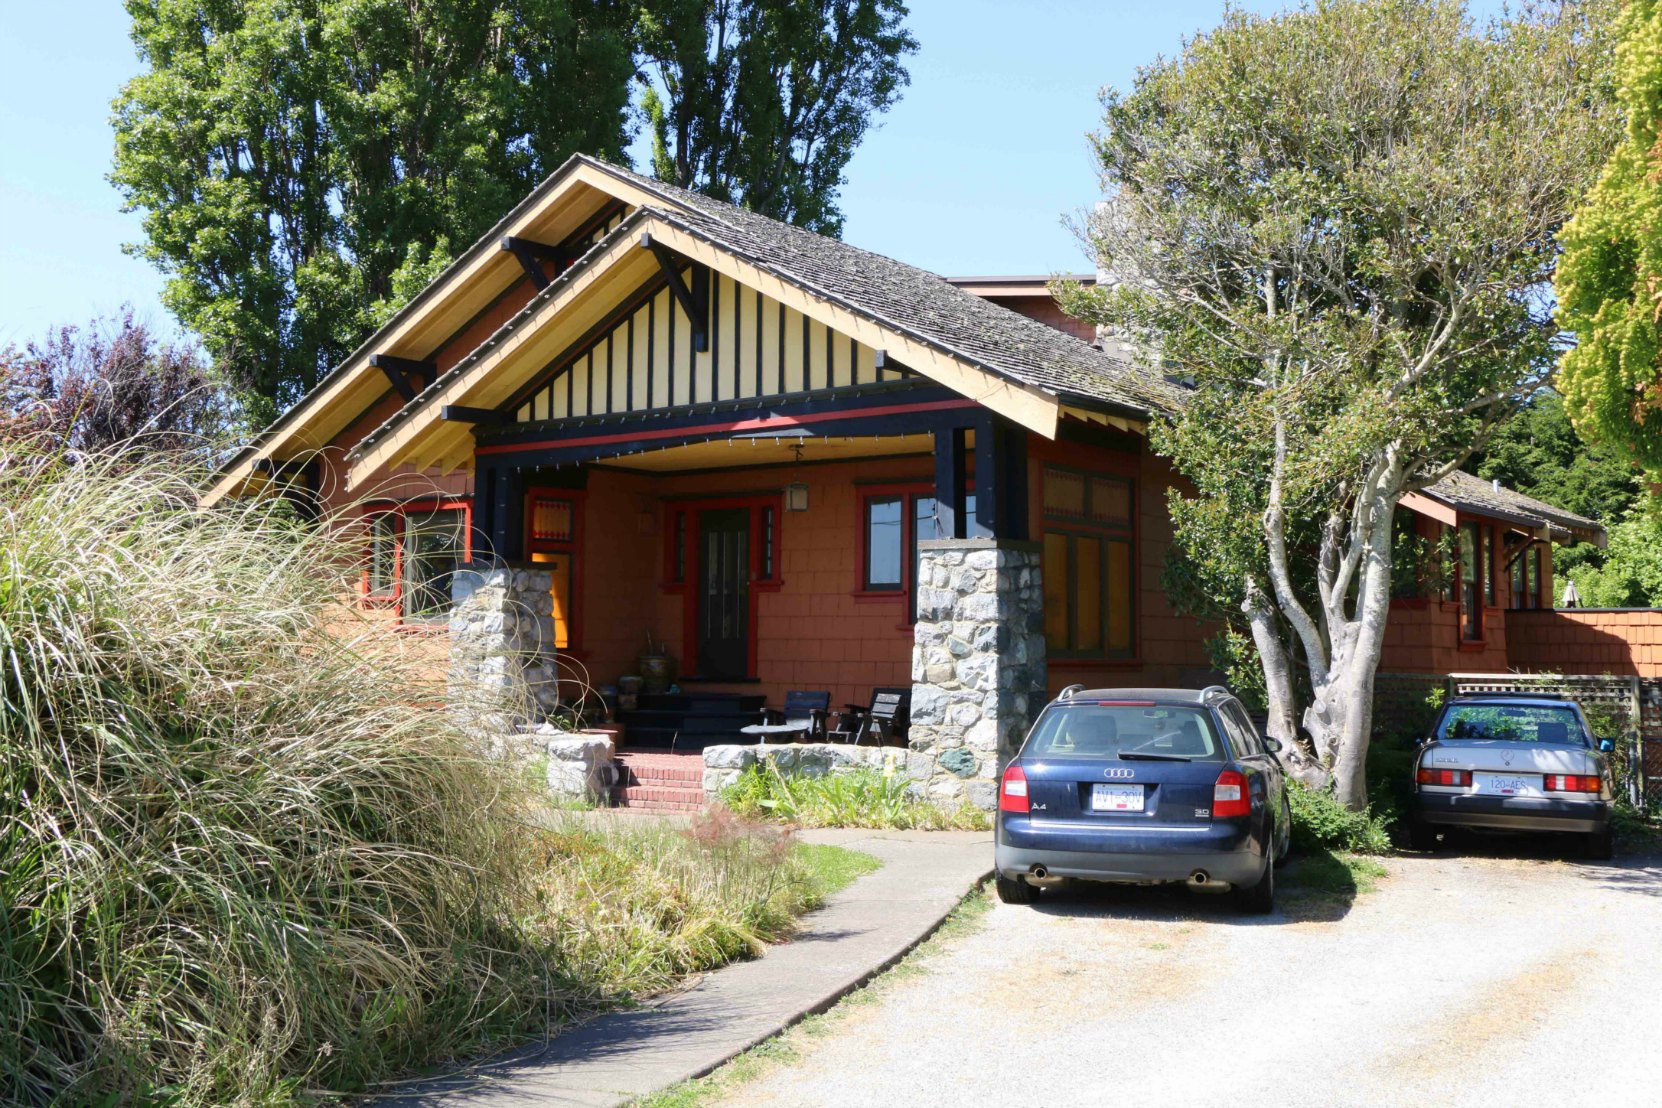 418-424 Beach Drive, Oak Bay. This Arts & Crafts bungalow was built in 1913.